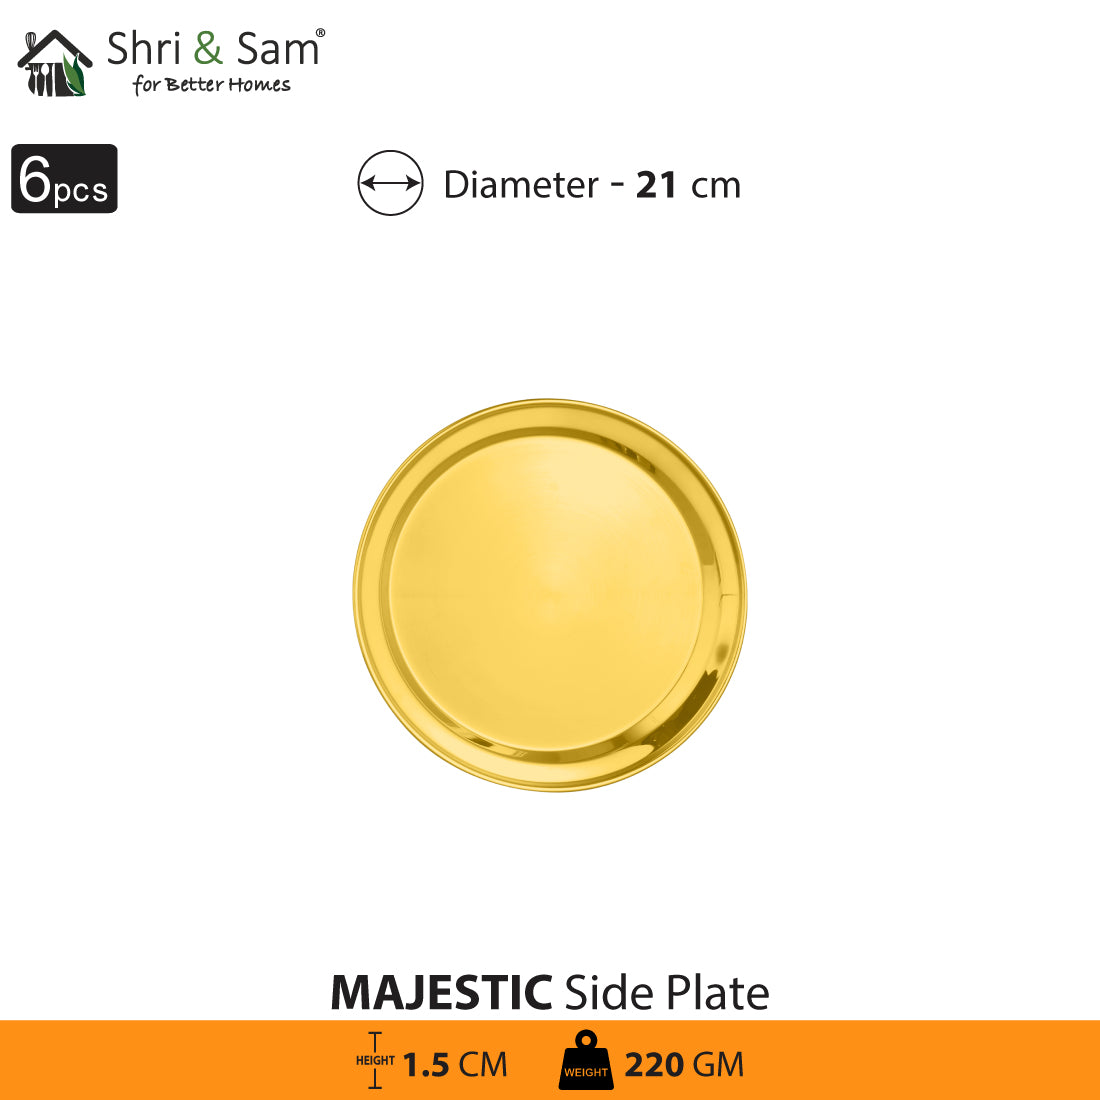 Stainless Steel 6 PCS Side Plate with Gold PVD Coating Majestic